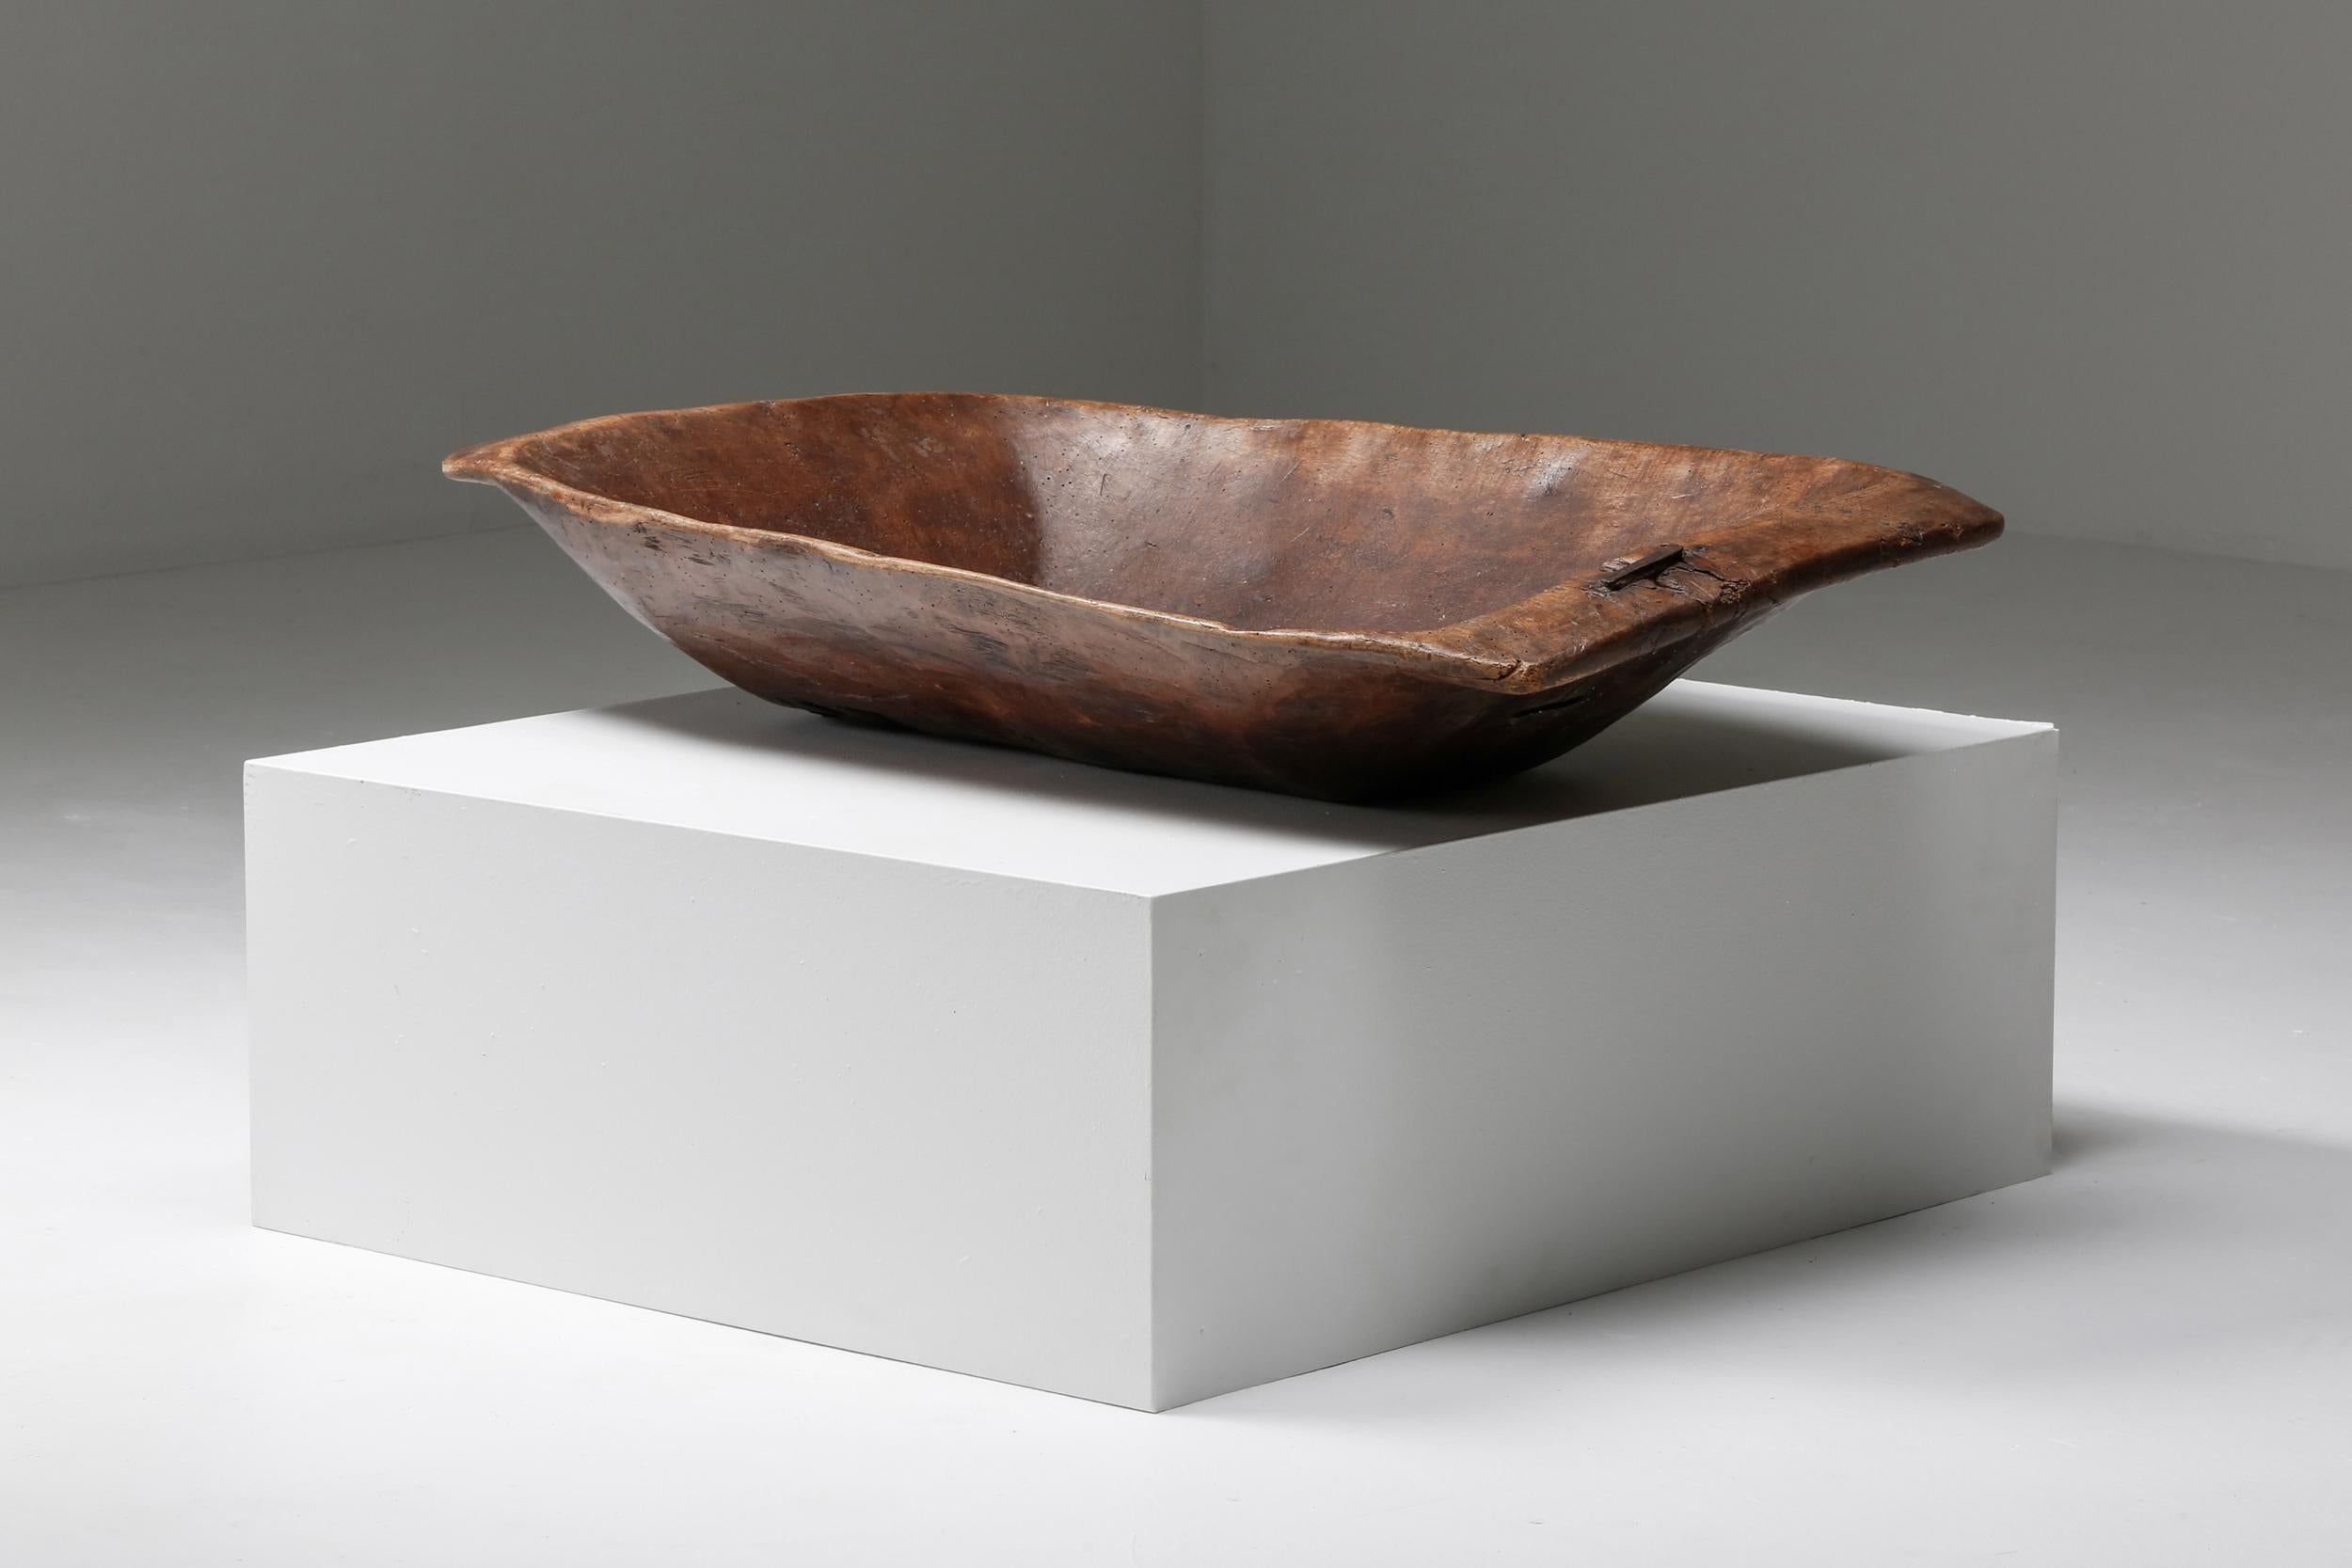 Wabi Sabi rustic XL bowl, Japanese design, Decorative bowl, Wabi Sabi

This wood bowl perfectly embodies the enduring Japanese concept of 'wabi-sabi'. Made from an ancient piece of wood characterized by significant fissures and gaps, the artist